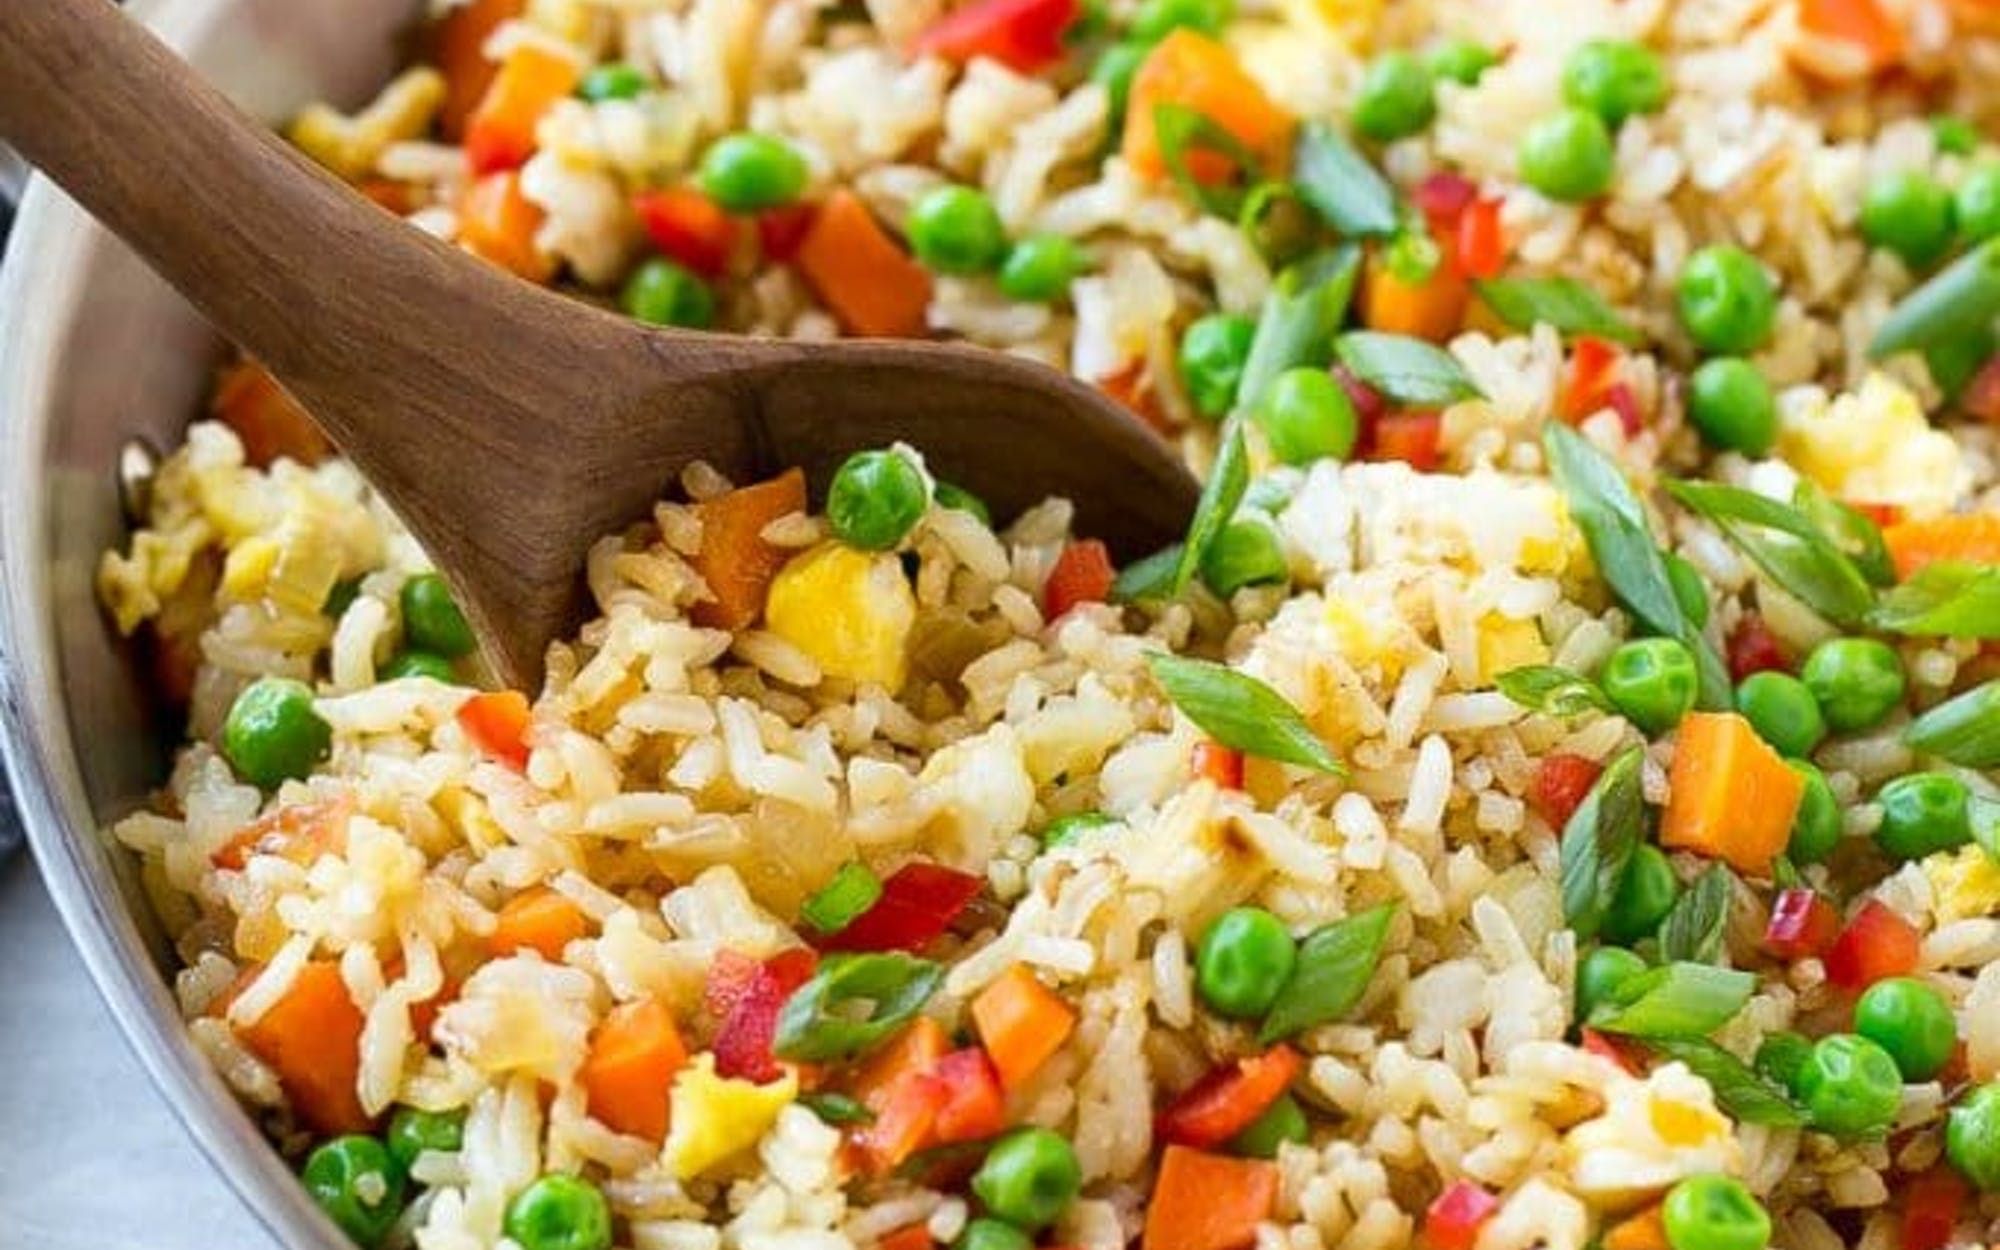 87. Vegetable Fried Rice